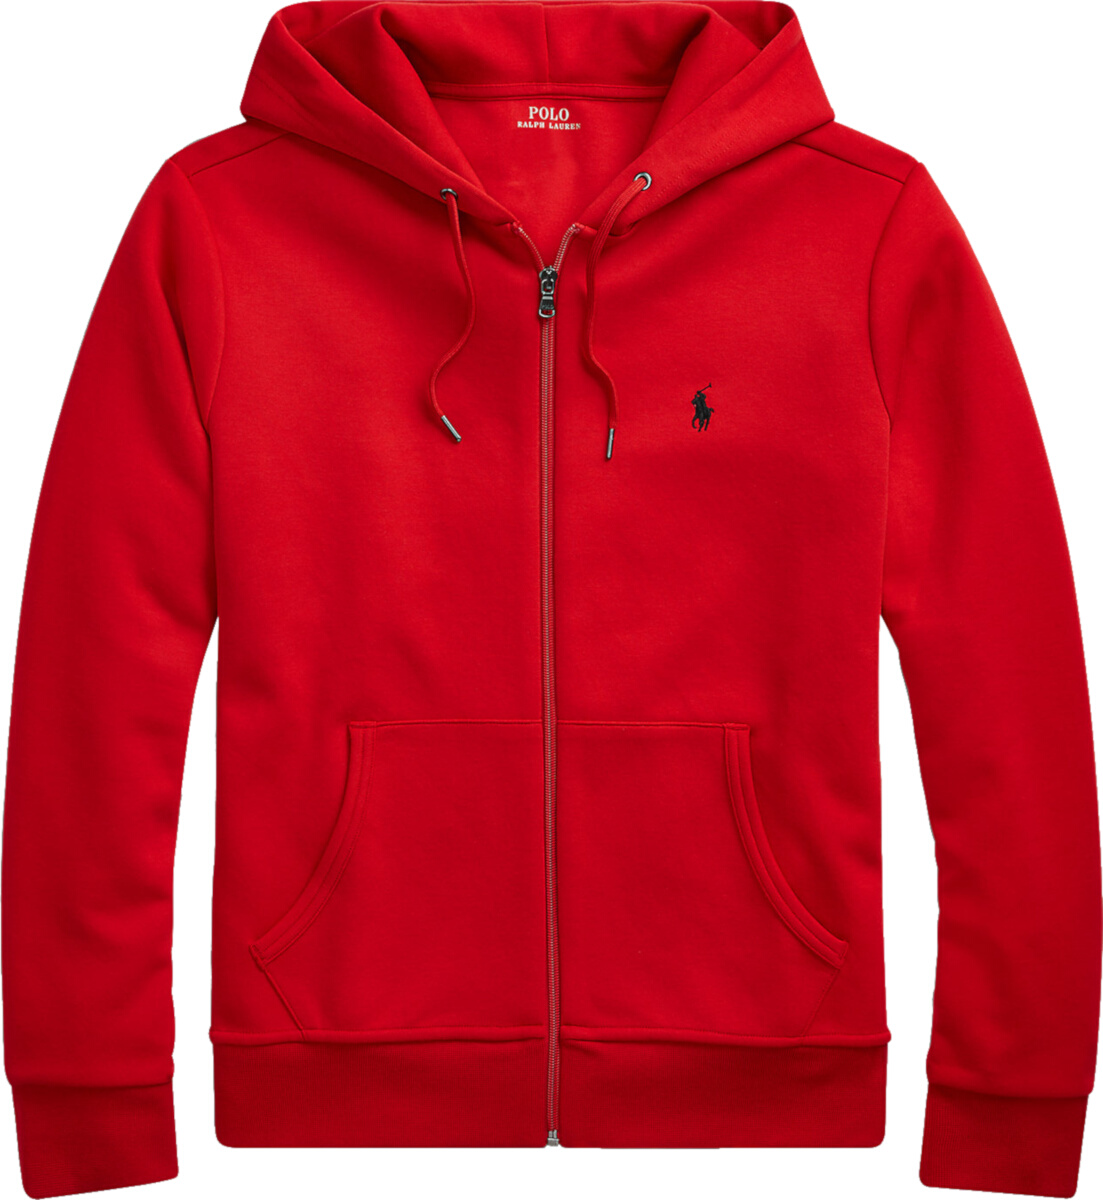 Polo Ralph Lauren Red 'Double Knit' Zip Hoodie | Incorporated Style